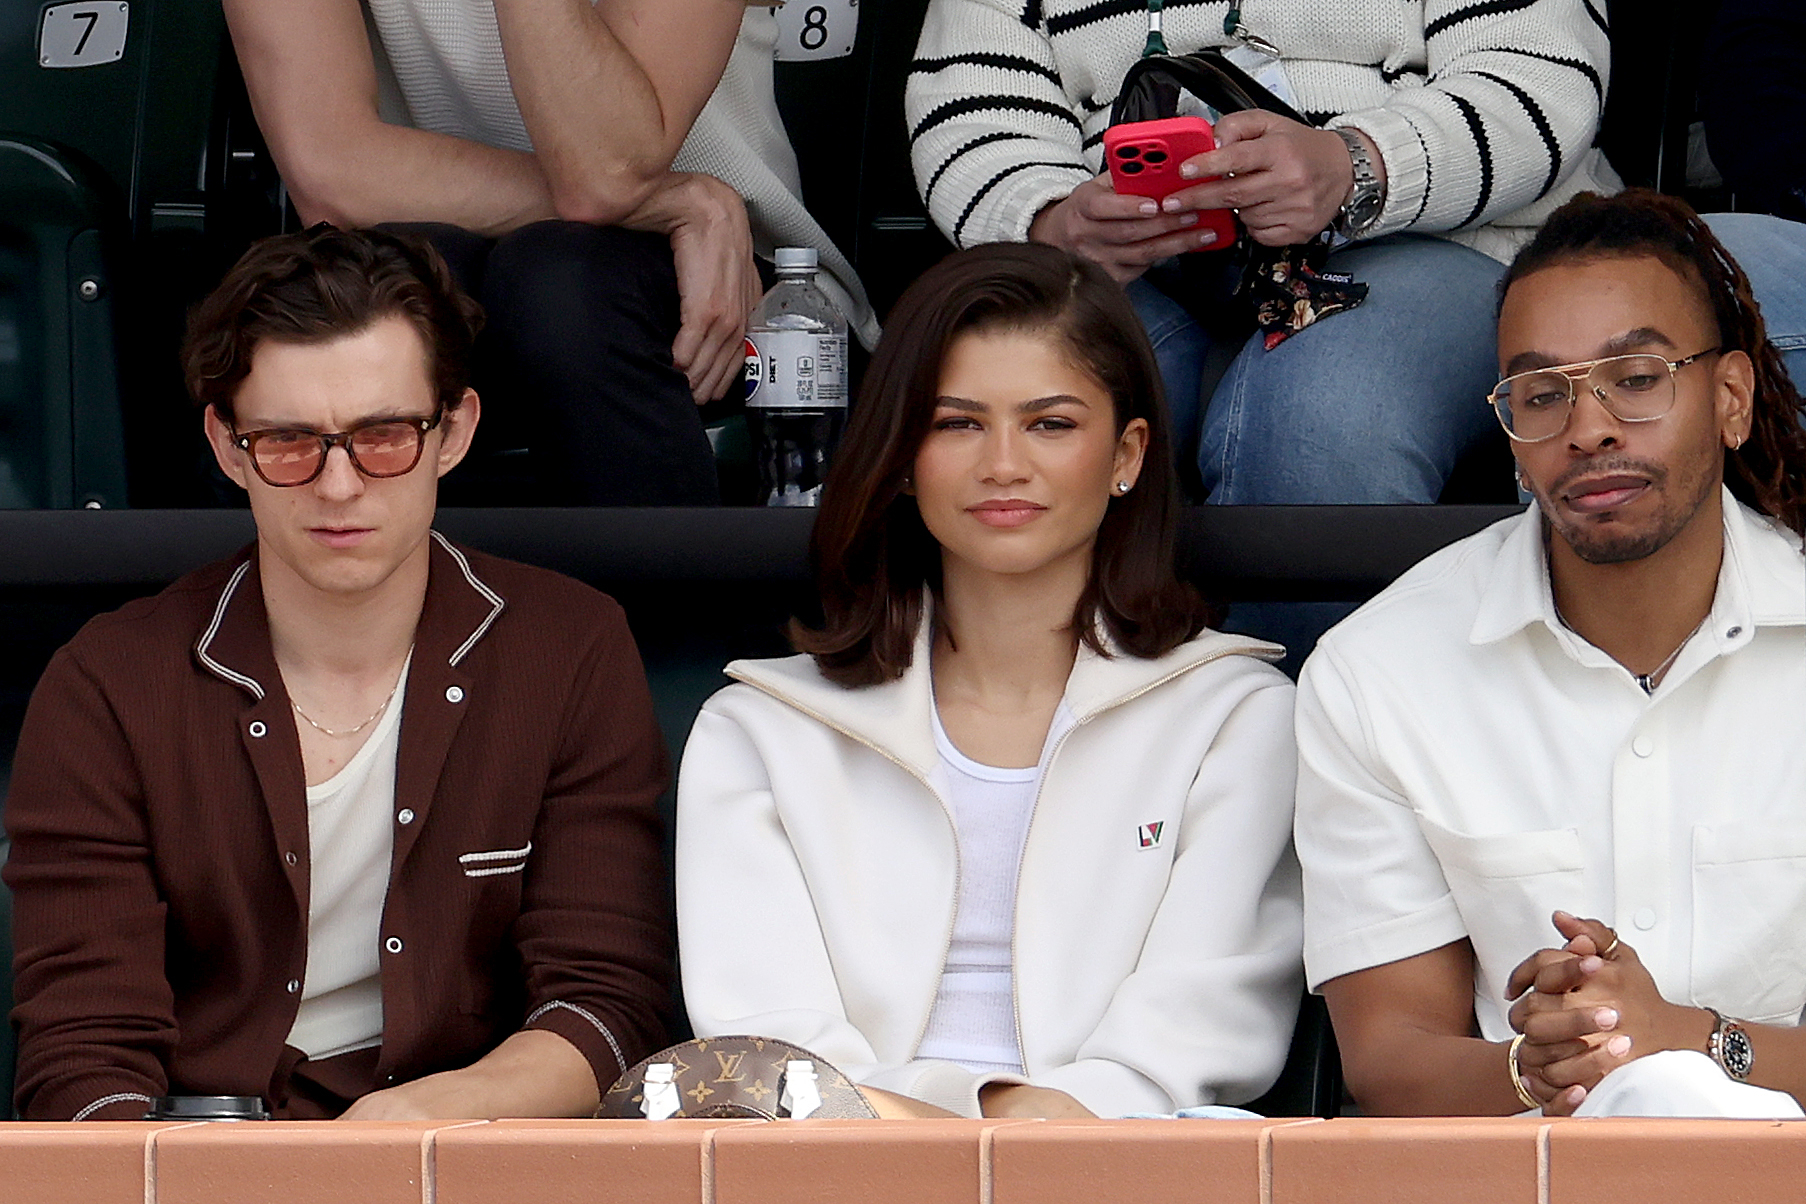 Tom Holland, Zendaya, and a third person sit side by side at an outdoor event, appearing attentive